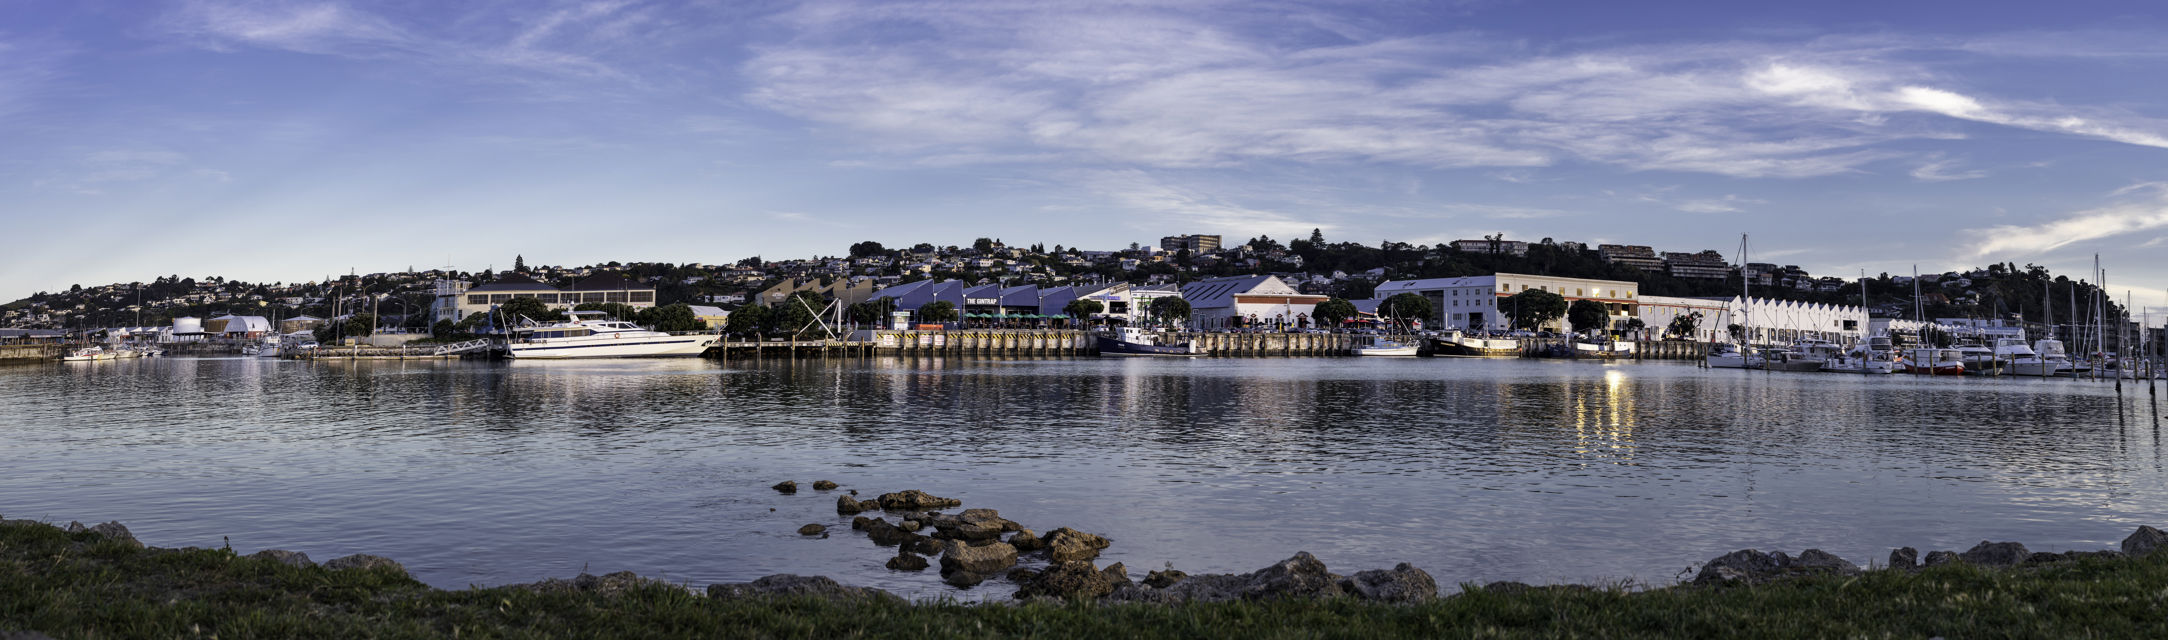 Ahuriri Evening - A summer evening looking over the Ahuriri inner harbour from Westshore.